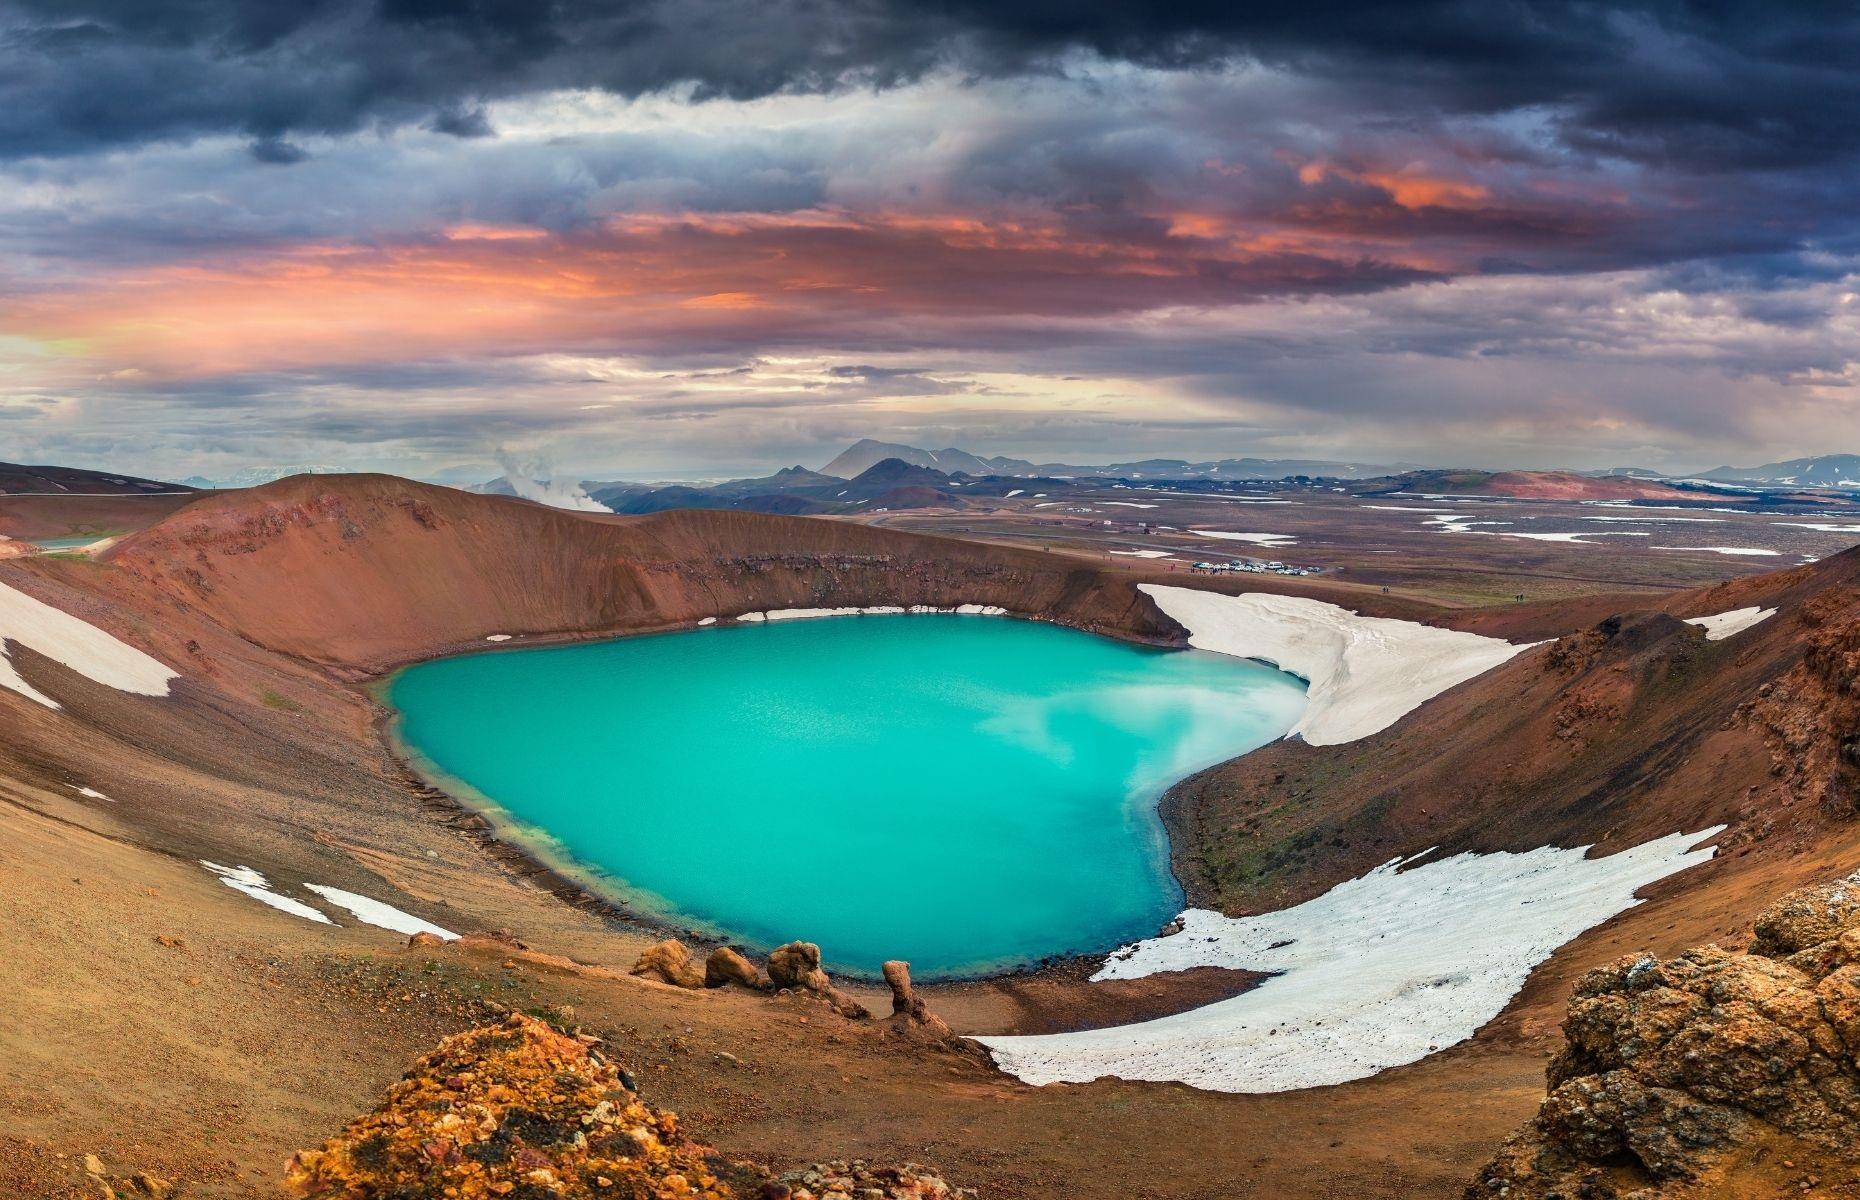 <p>During your Diamond Circle adventures, be sure to take the time to soak up the majesty of <a href="https://guidetoiceland.is/travel-iceland/drive/krafla">Krafla volcano</a> and Lake Víti. Located close to Lake Mývatn in north Iceland, this unusual landscape is home to a seven-mile (10km) wide crater filled with vibrant green water. Take a hike and marvel at more natural wonders while you're there, as you witness fascinating flora and a wealth of geological sites, including Dimmuborgir lava fortress, which formed during an eruption some 2,300 years ago.</p>